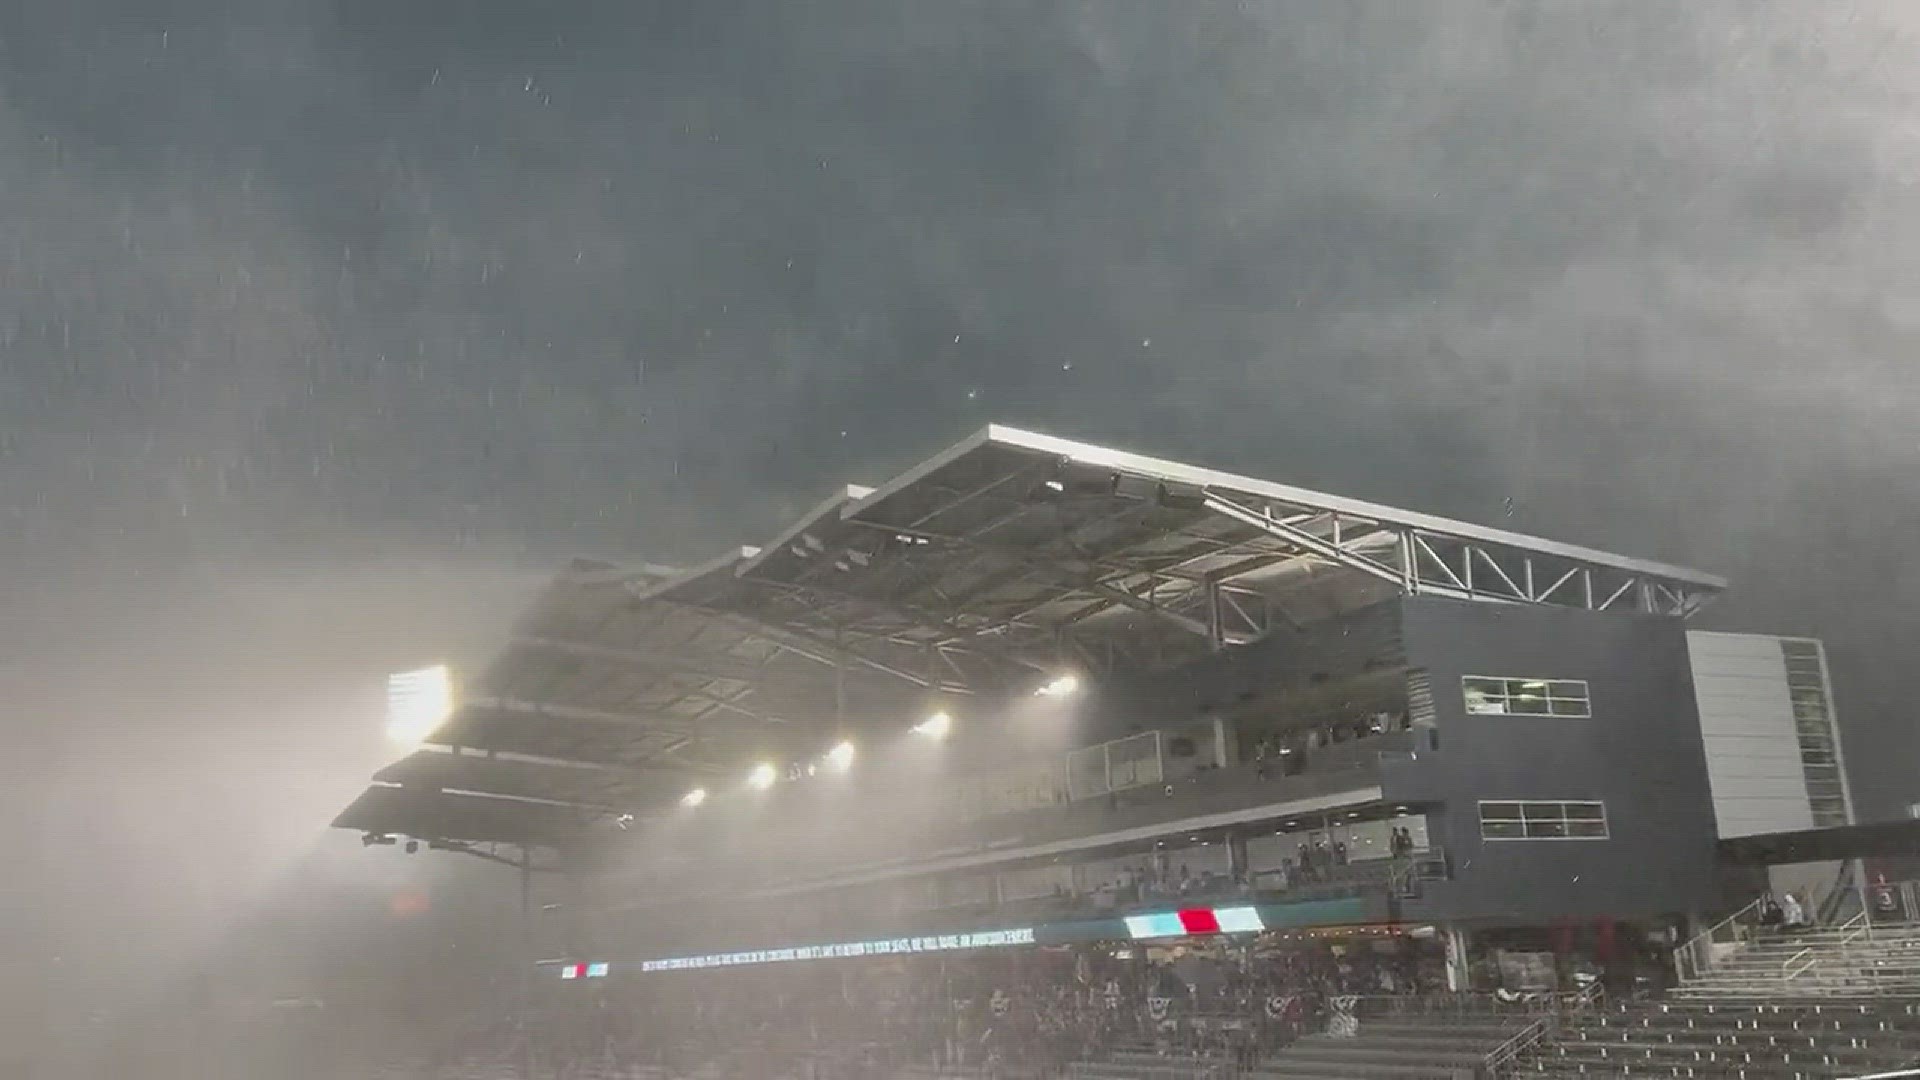 Heavy rain fell at the Colorado Rapids game at Dick's Sporting Goods Park on the Fourth of July.